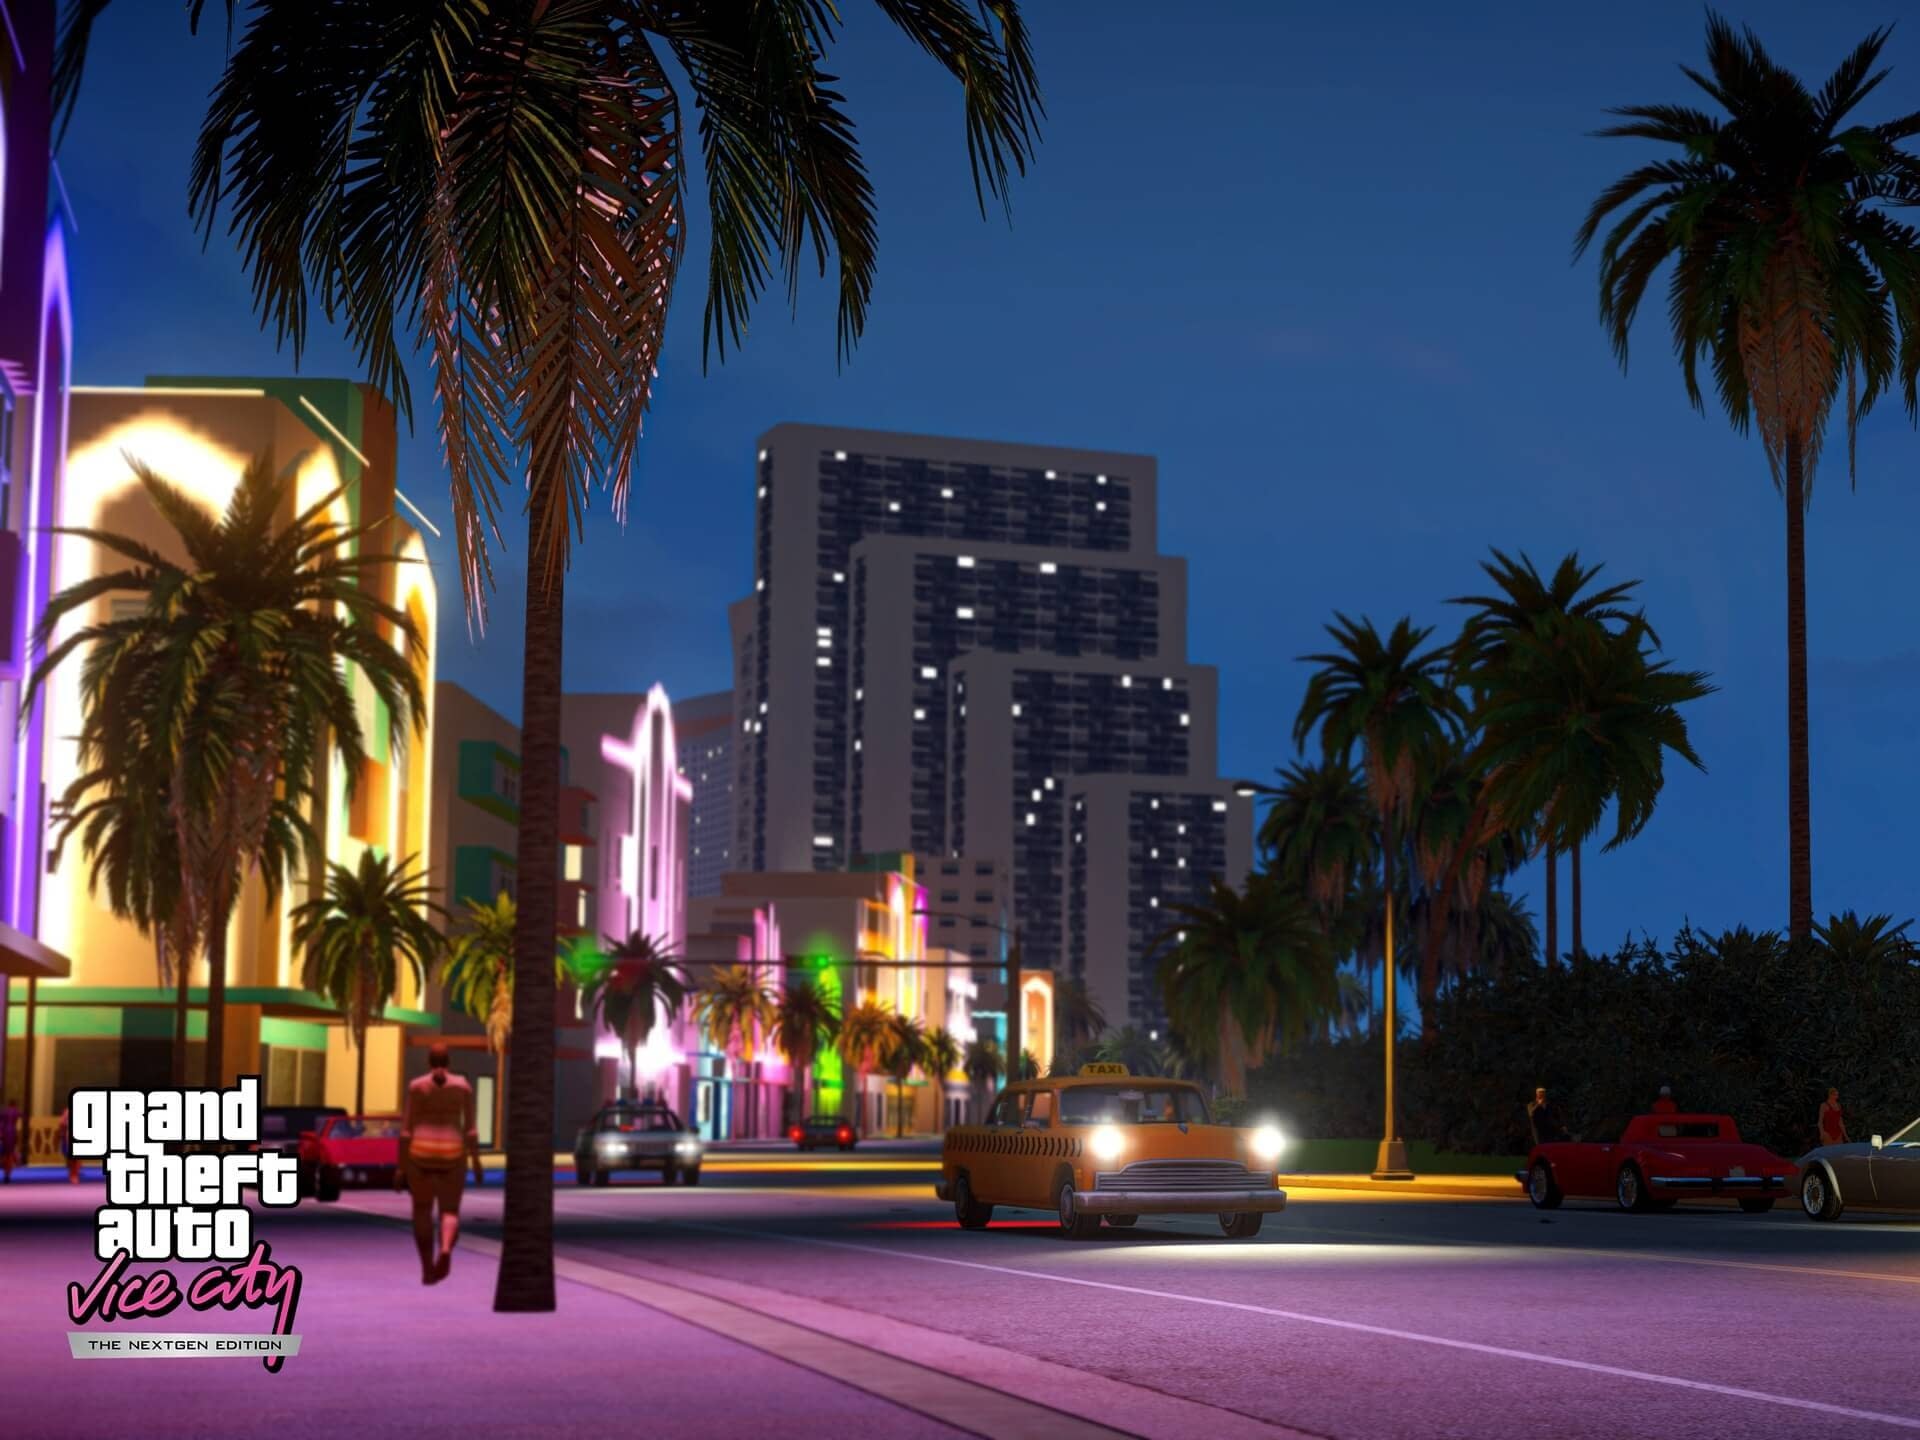 GTA: The First Play Video for Vice City’s Nextgen Mode